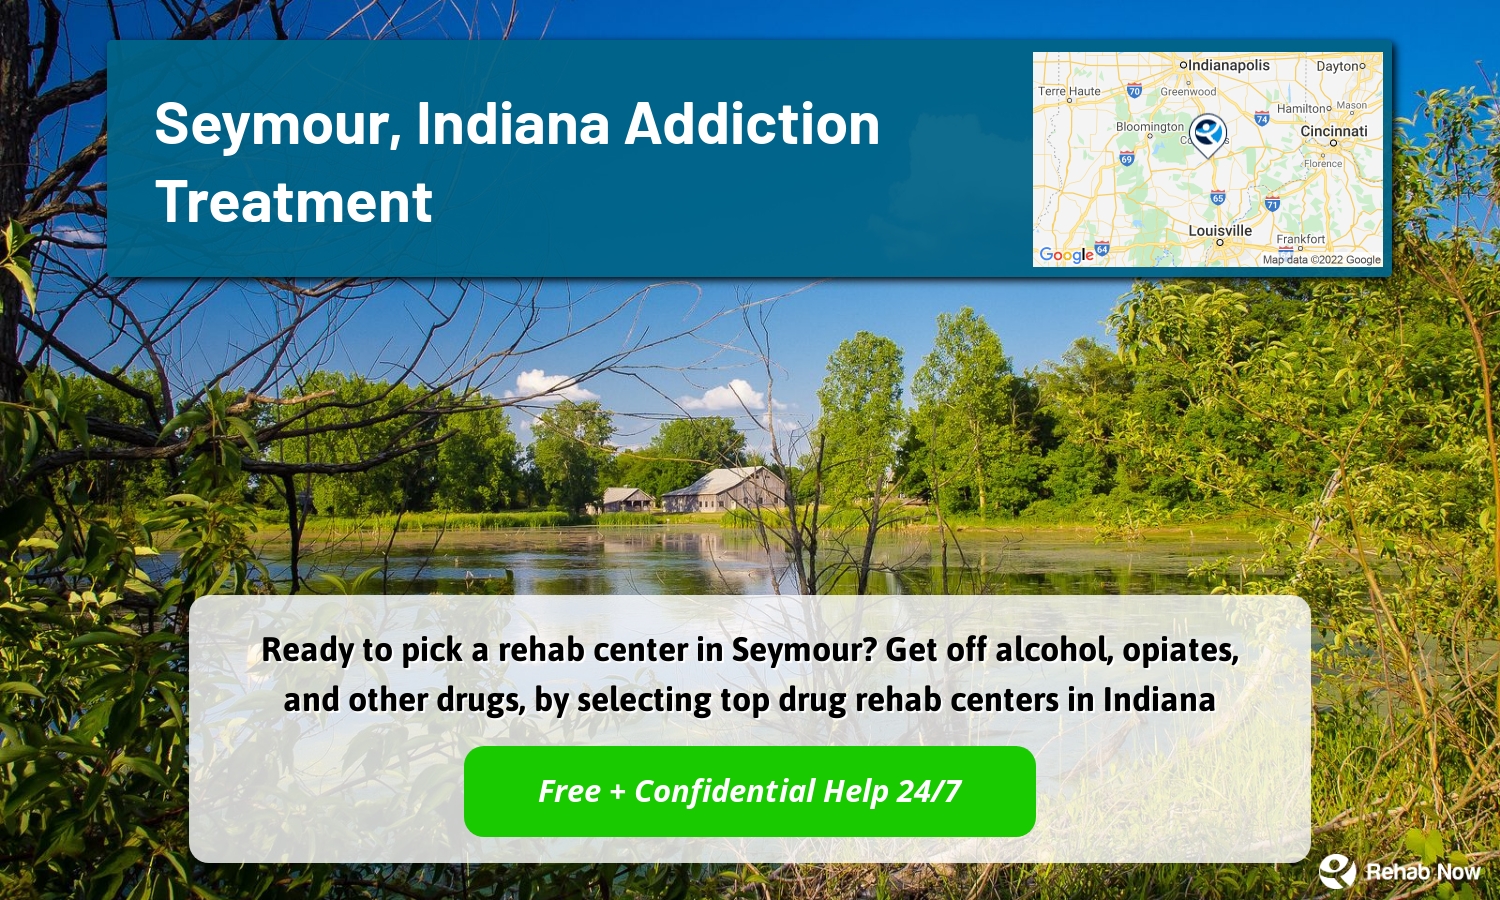 Ready to pick a rehab center in Seymour? Get off alcohol, opiates, and other drugs, by selecting top drug rehab centers in Indiana